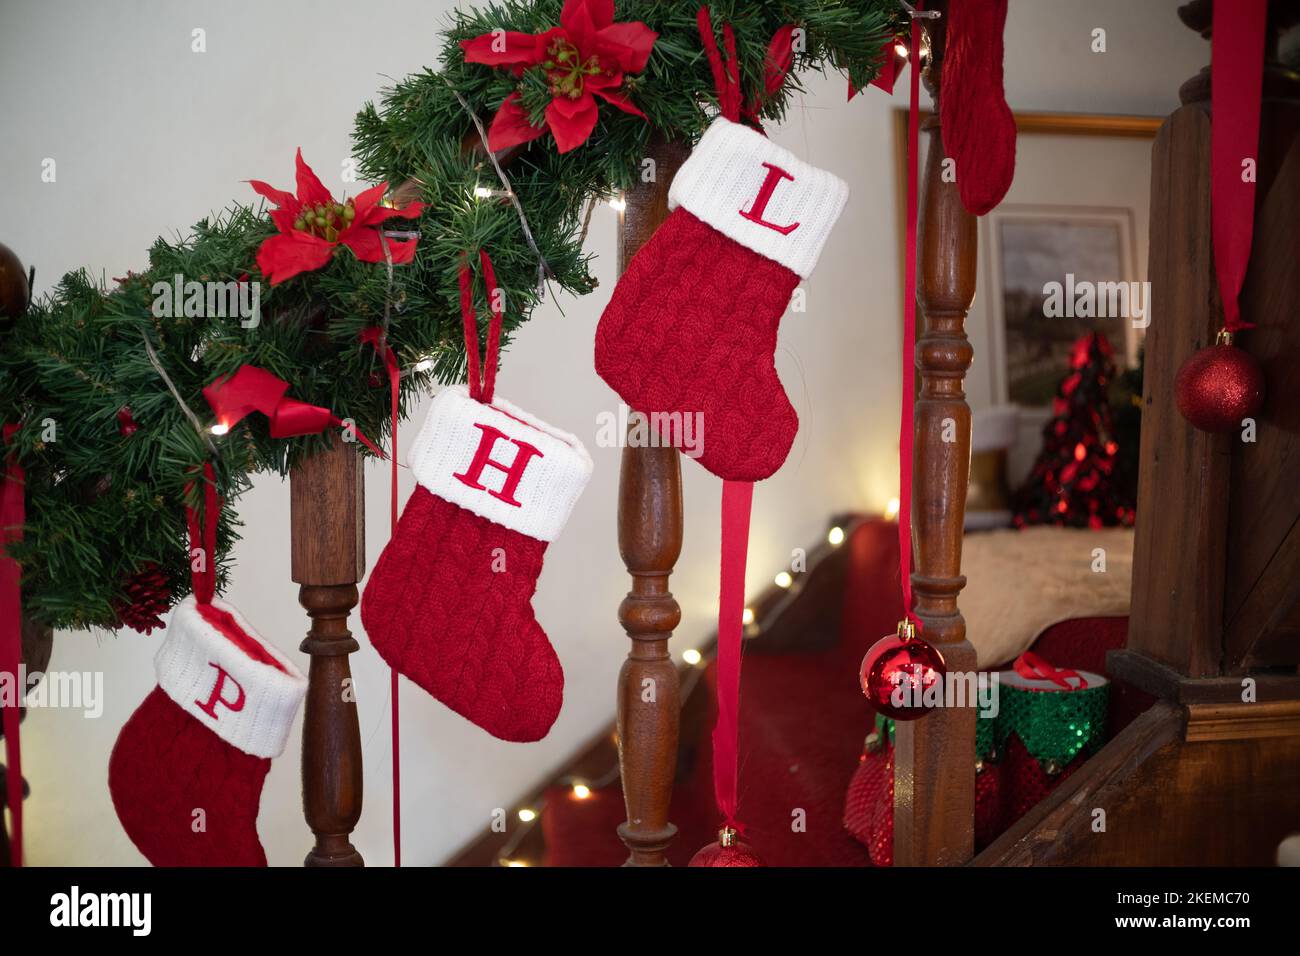 Closed-up red socks hanging for Christmas home decoration Stock Photo